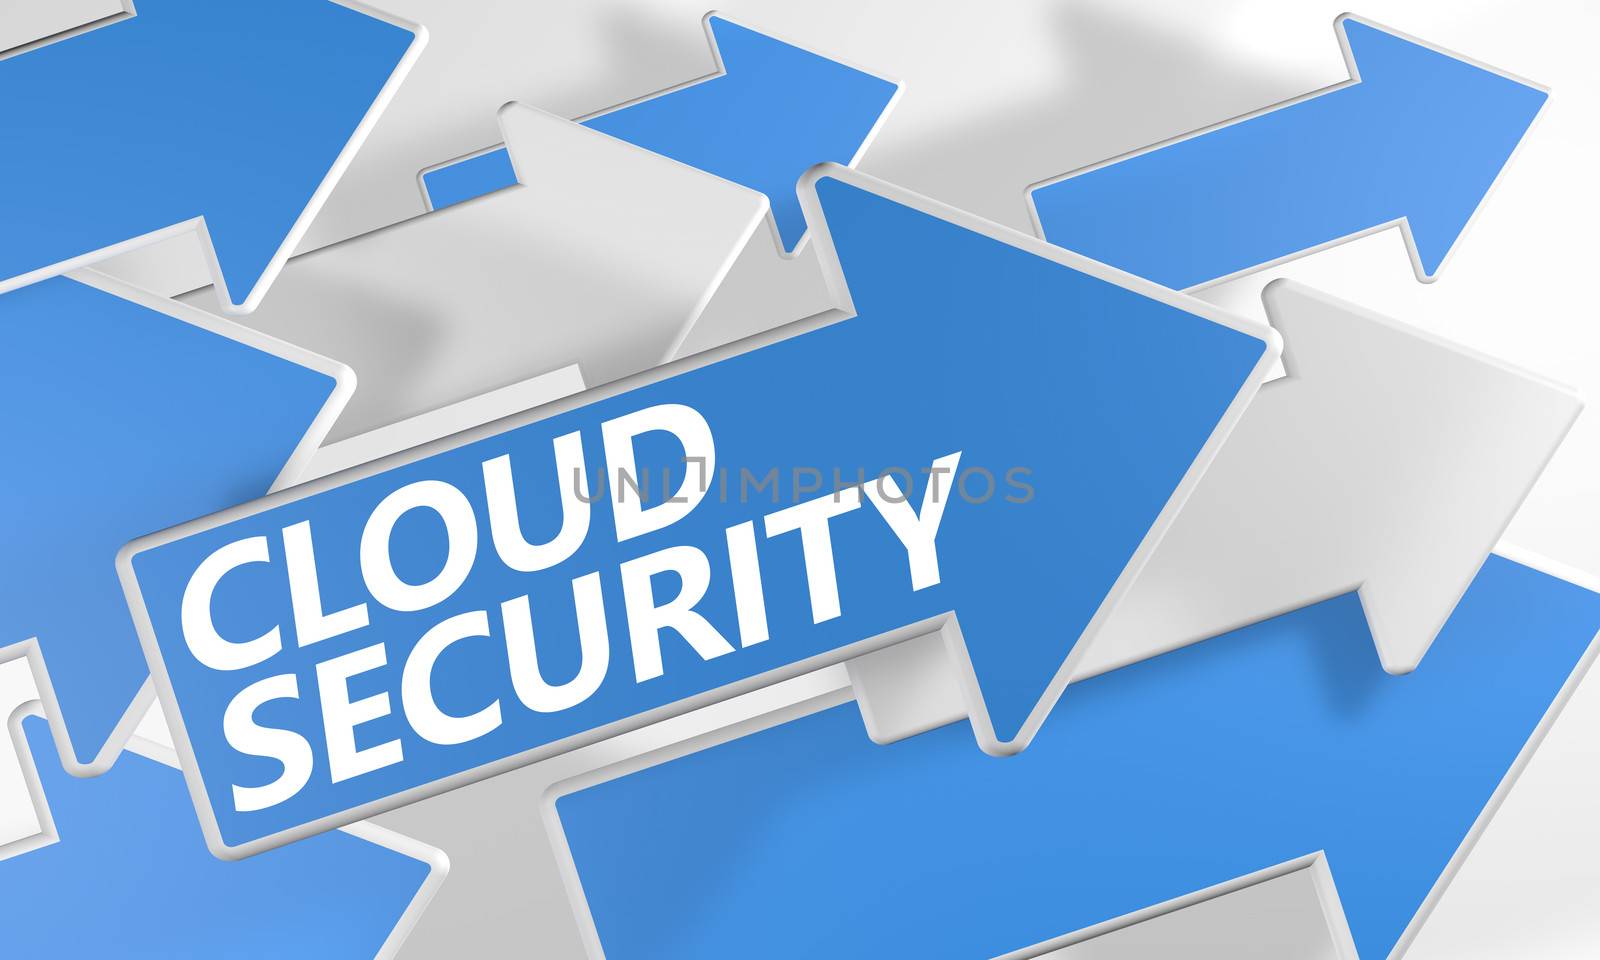 Cloud Security 3d render concept with blue and white arrows flying over a white background.